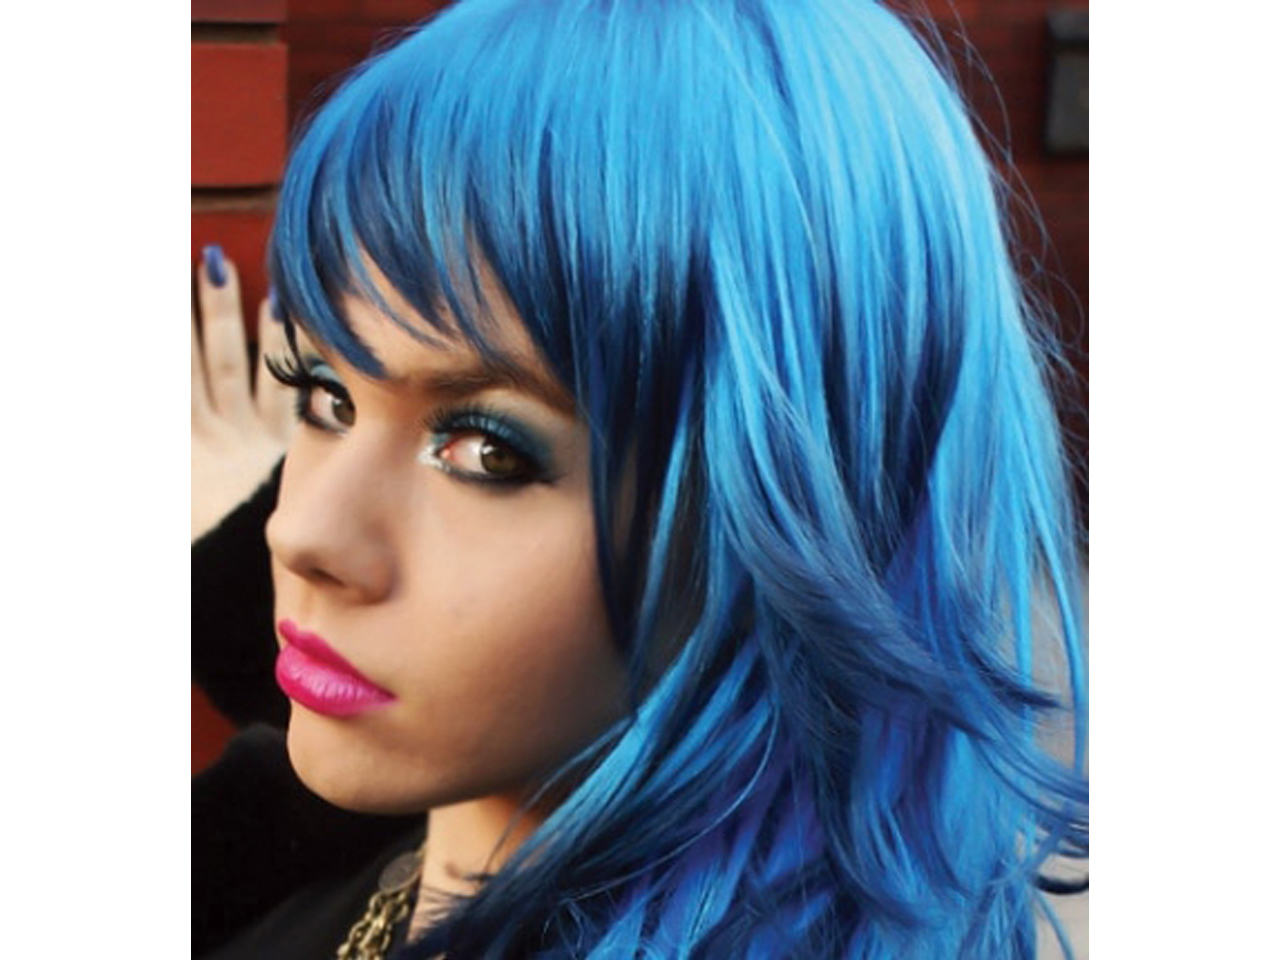 5. Lagoon Blue Hair Dye by Directions - wide 4